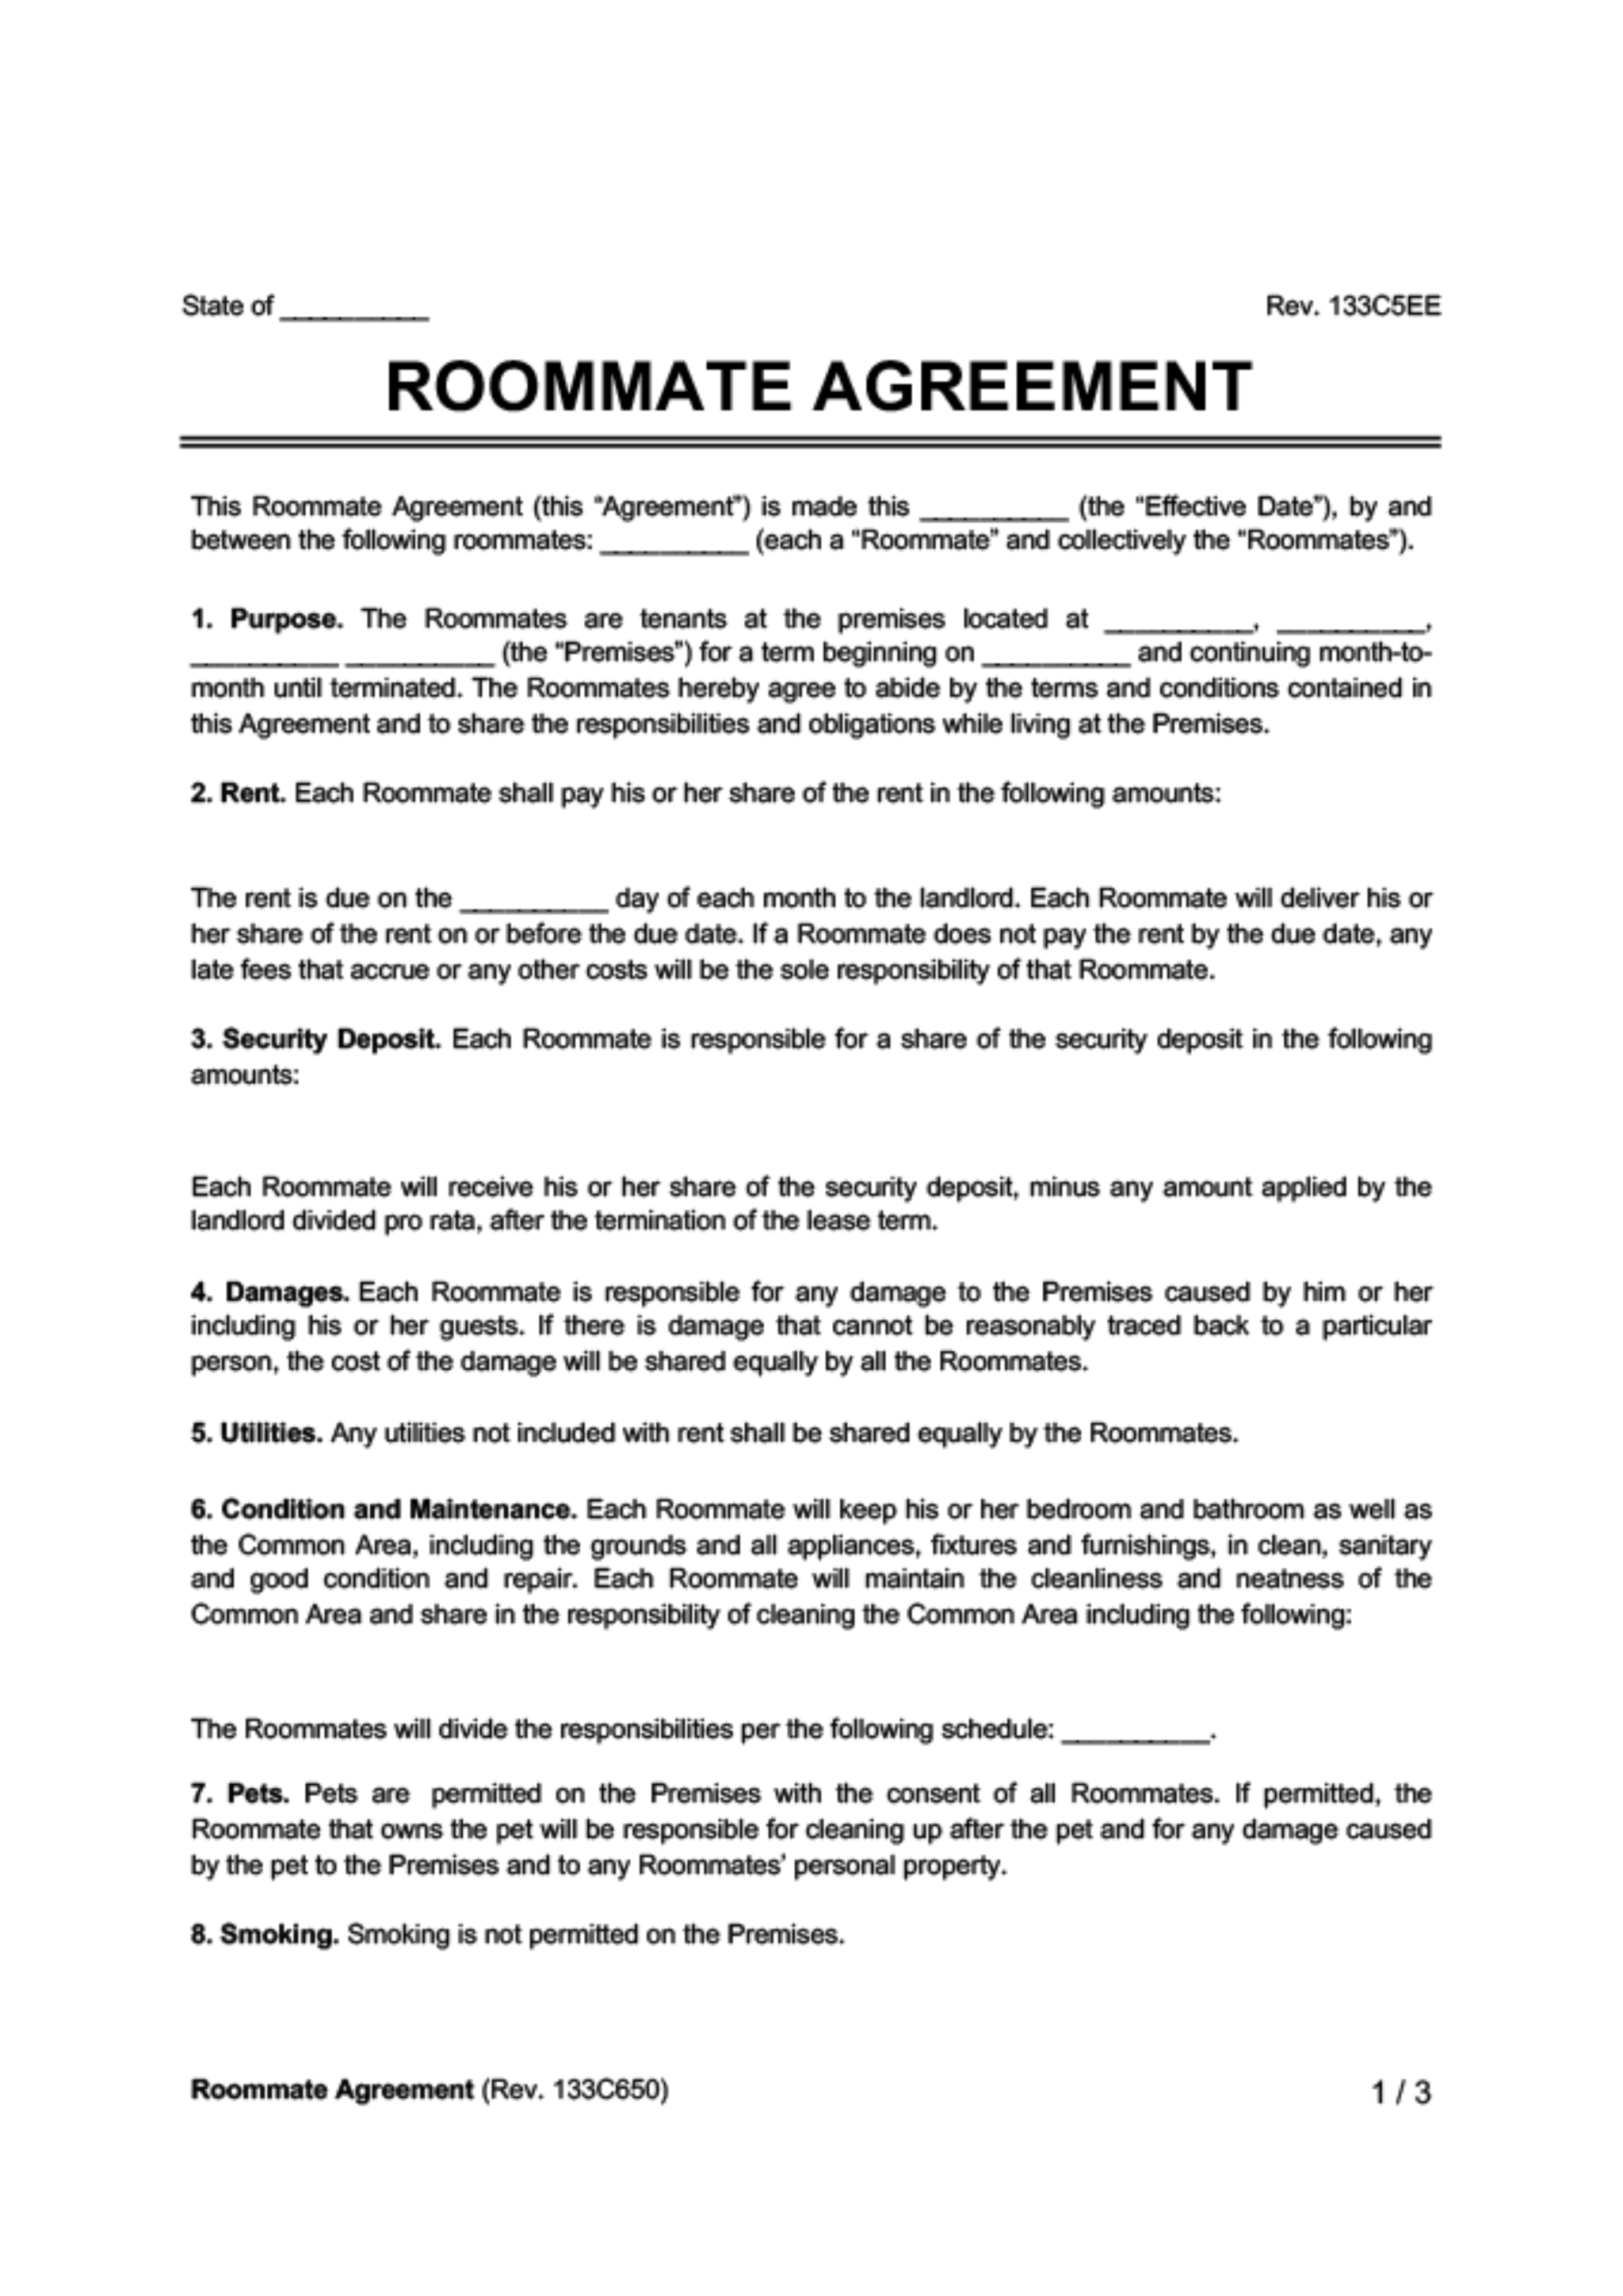 roommate agreement template